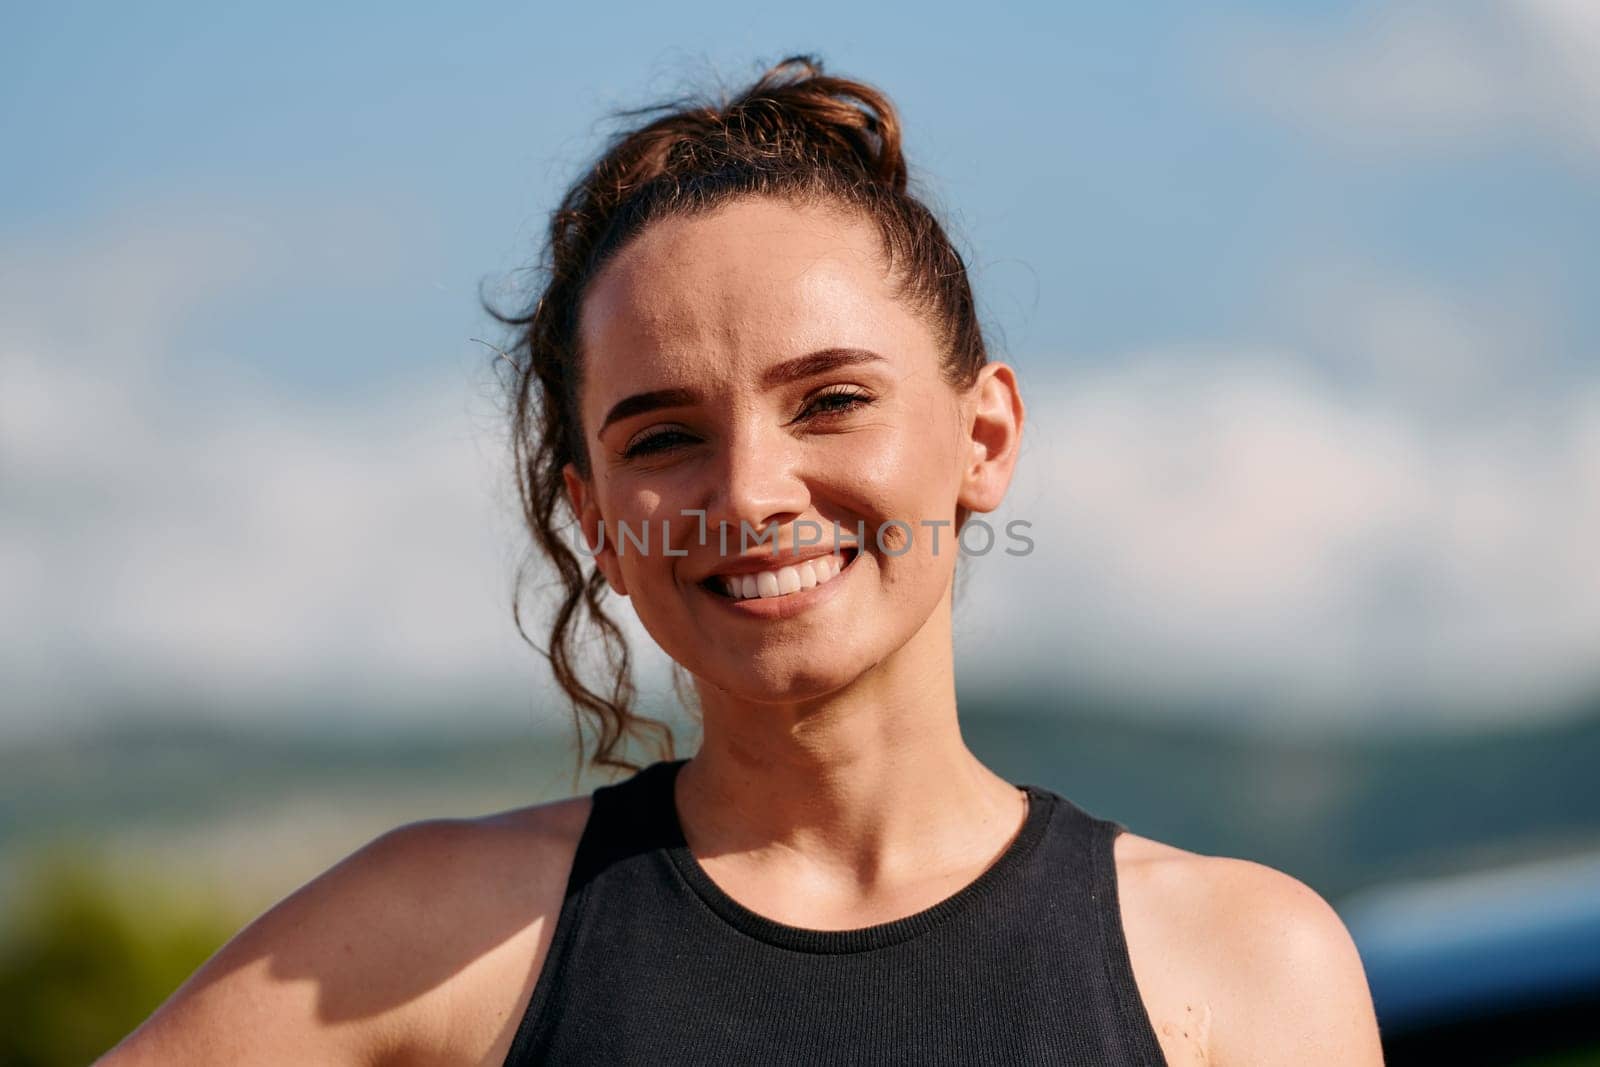 In a captivating close up portrait, an athletic woman exudes confidence and happiness, her wide smile radiating infectious joy and positivity.